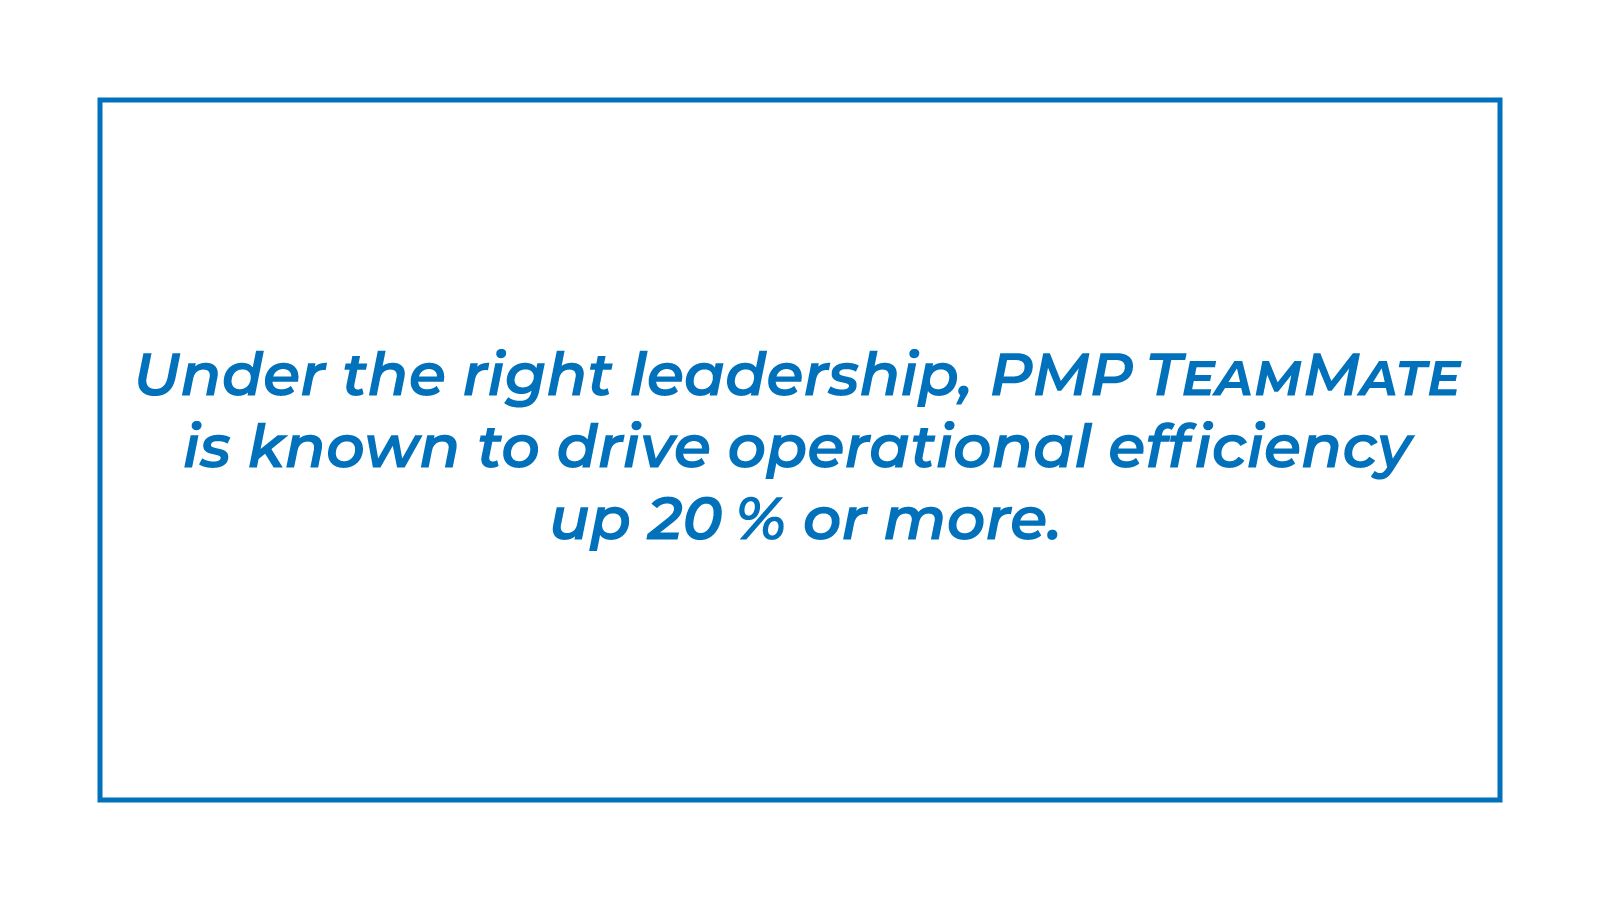 Under the right leadership, PMP TeamMate is known to drive operational efficiency up 20 % or more.